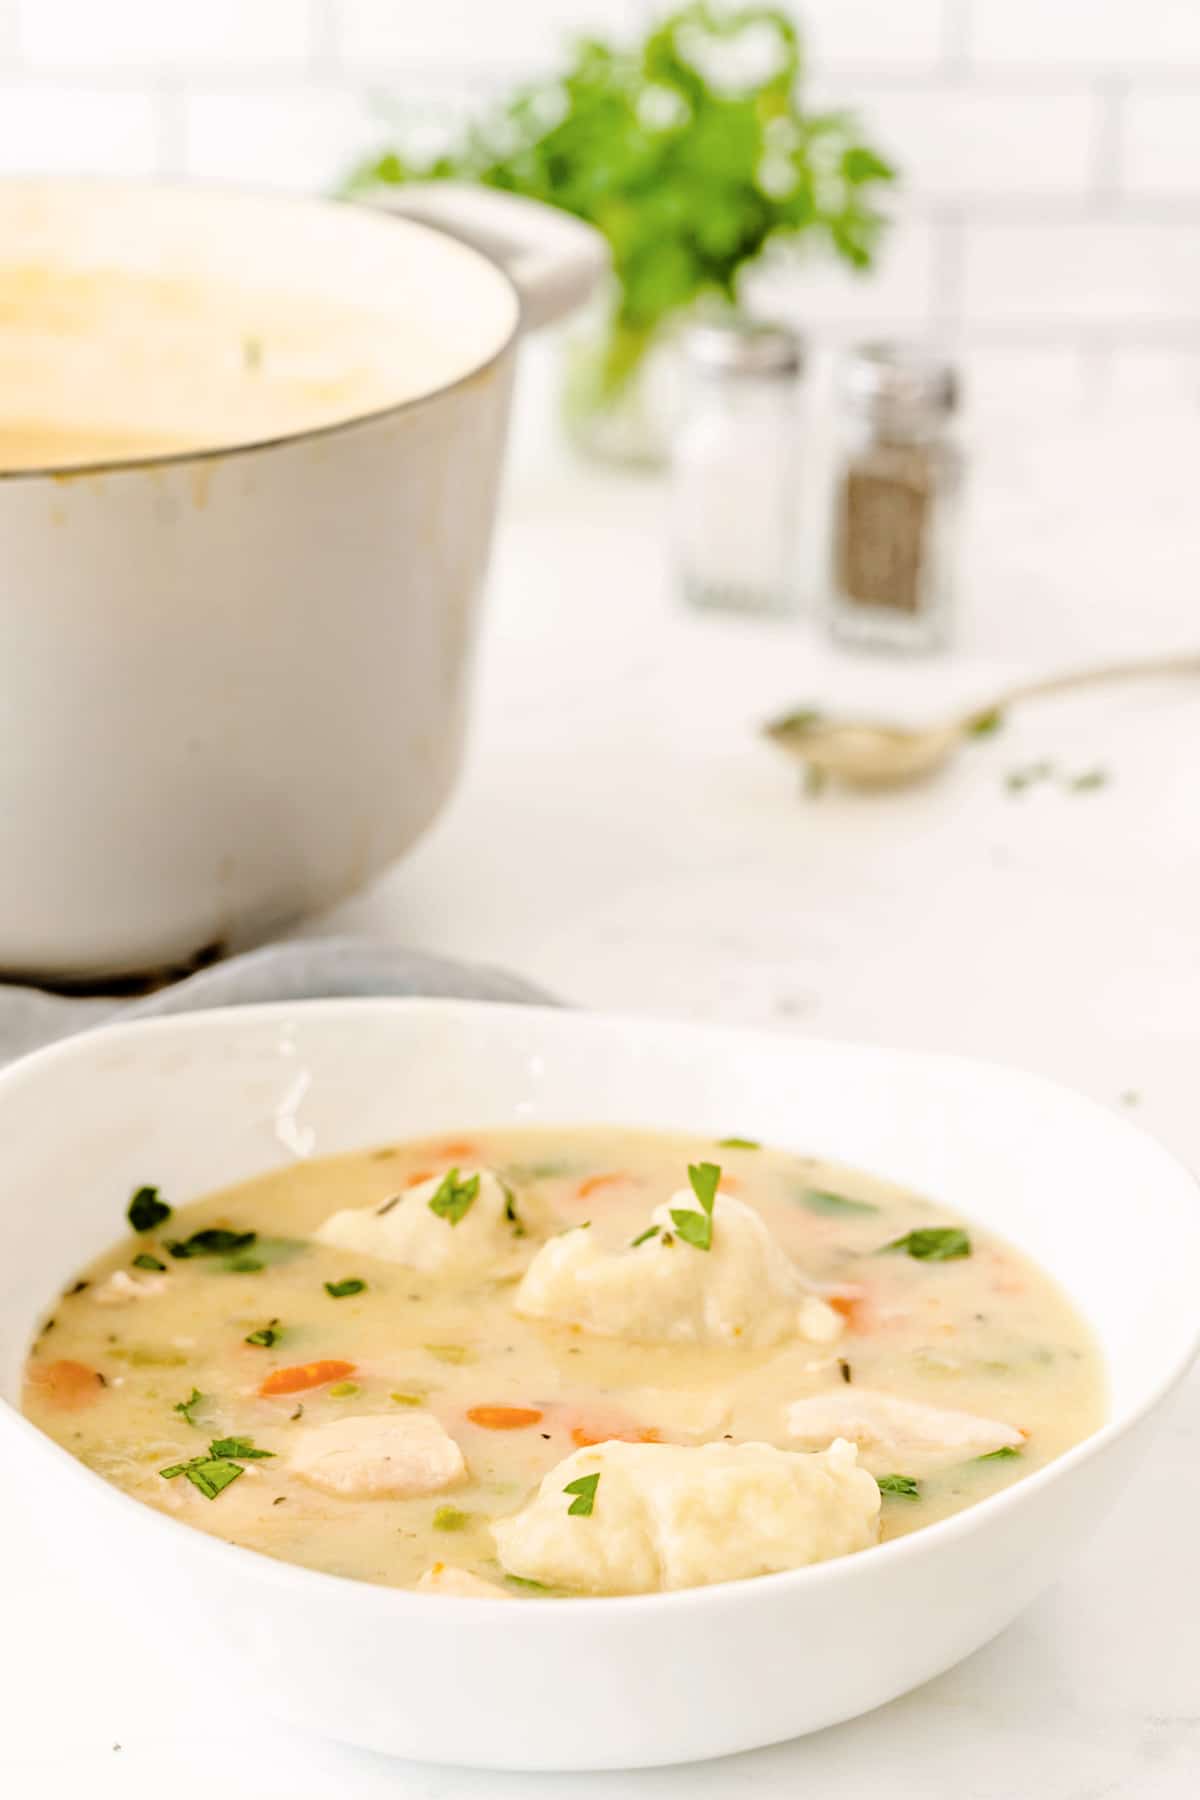 Bowl of chicken and dumplings soup